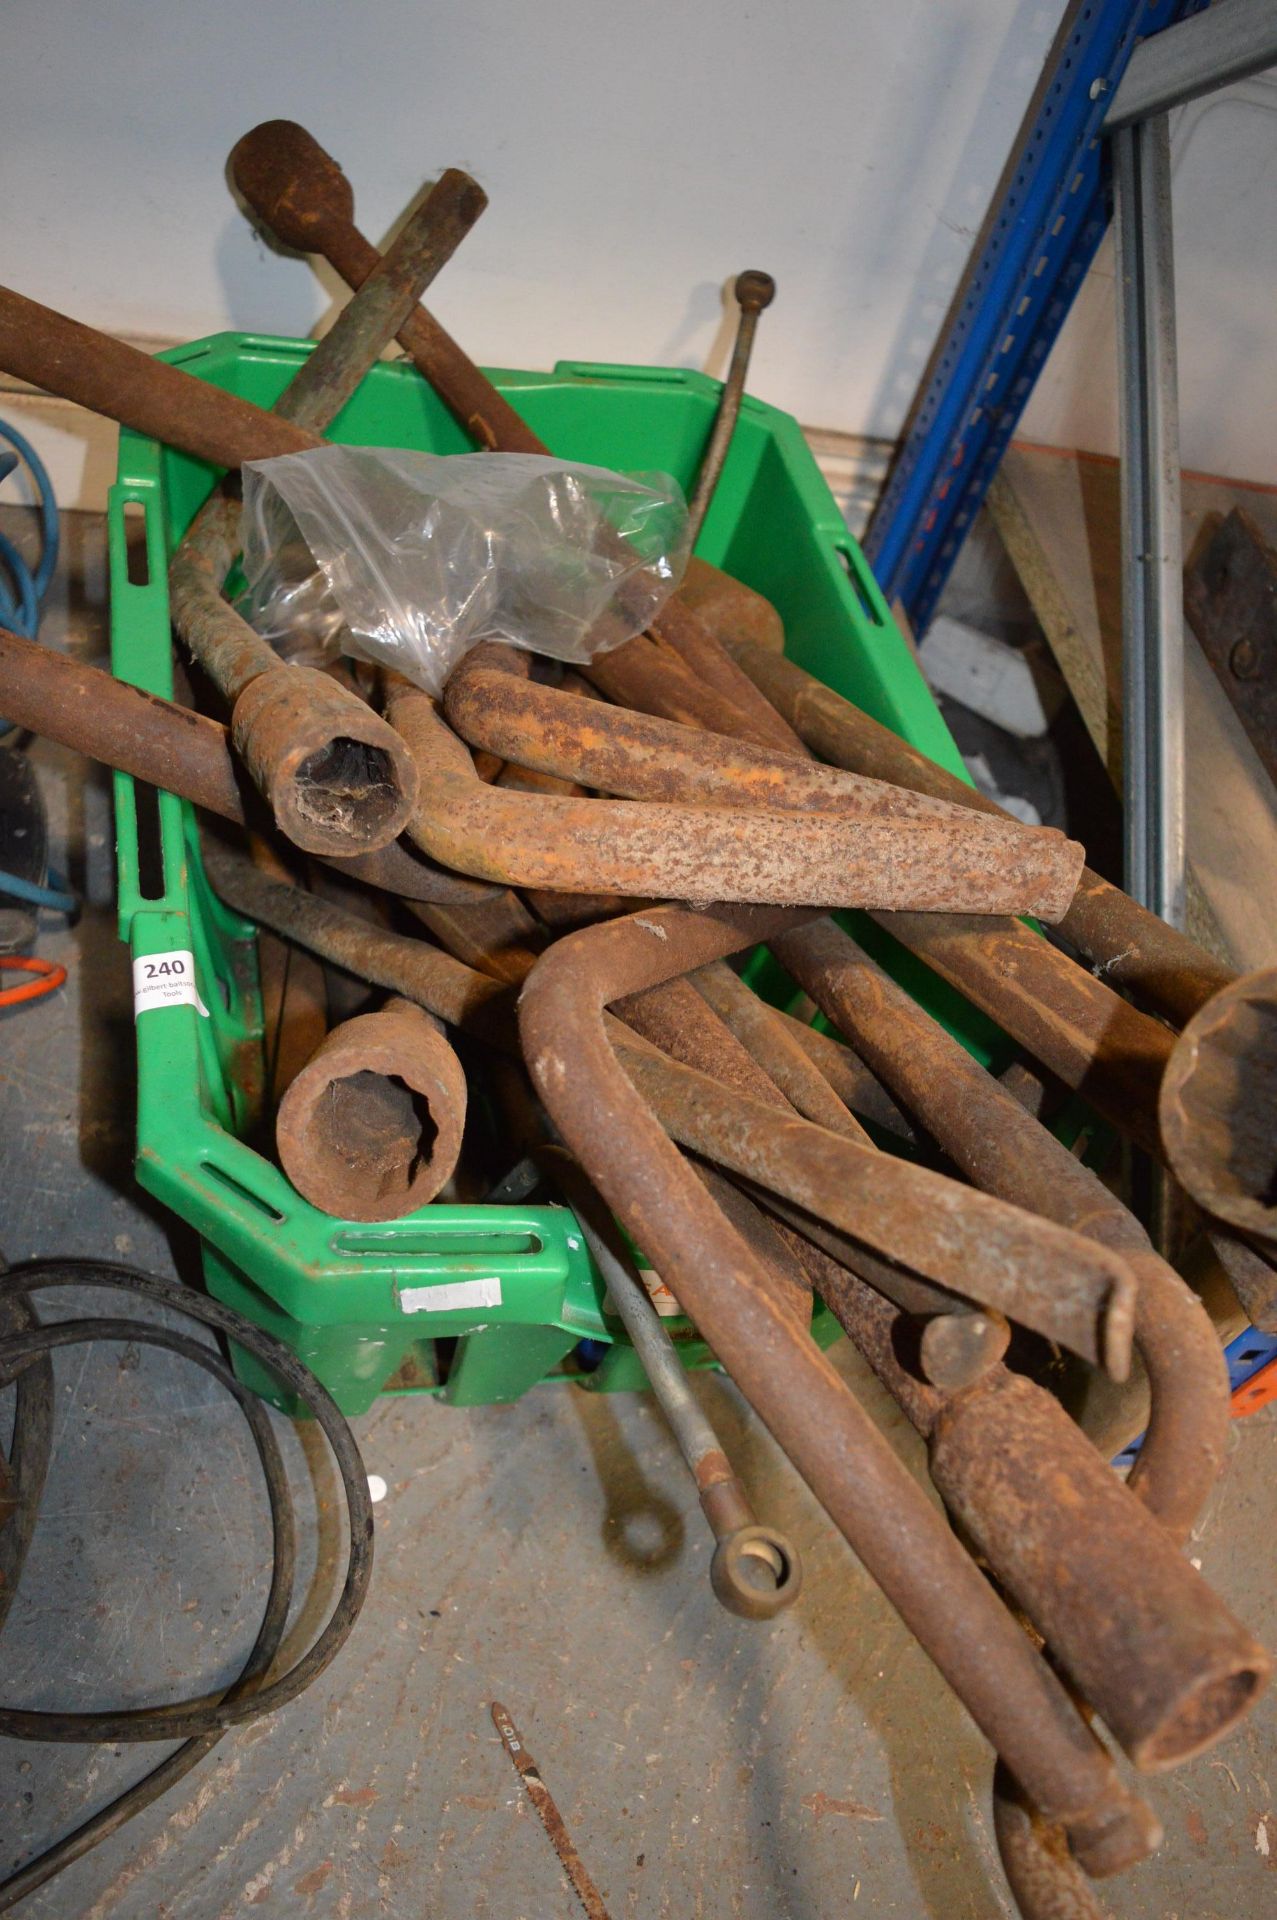 Box of Scrap Metal, Heavy Duty Wrenches, and a Sledgehammer